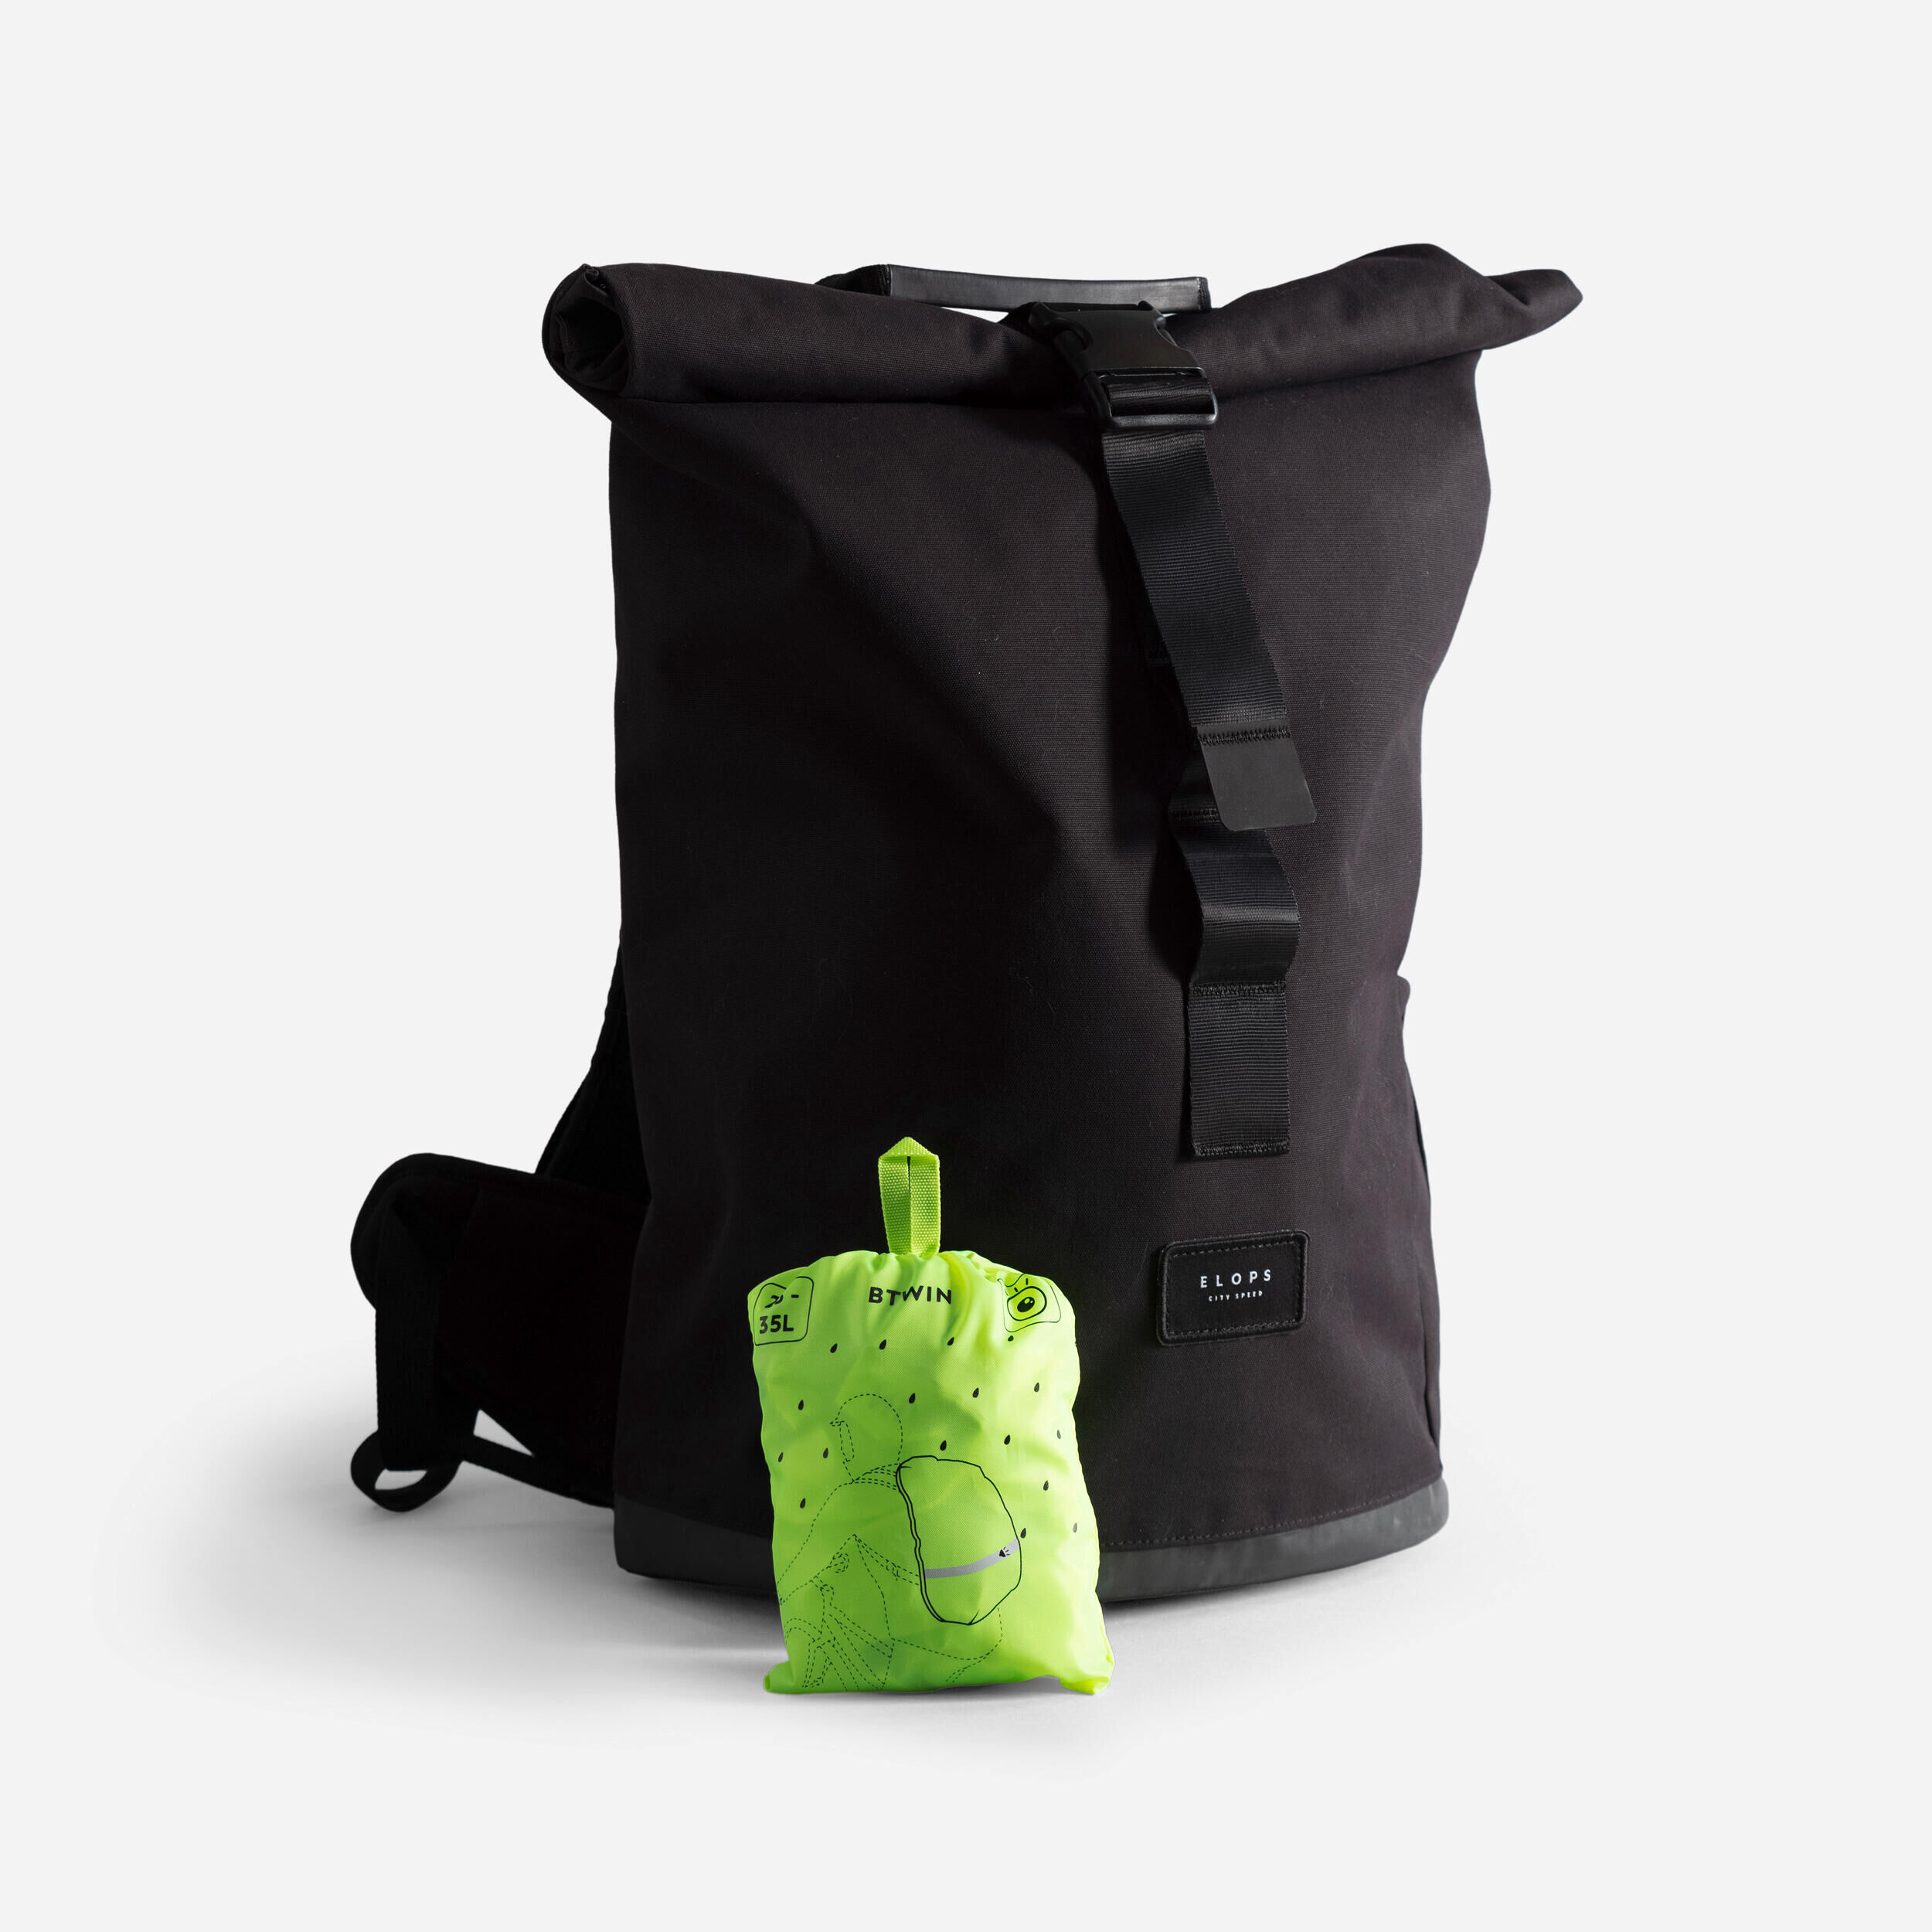 BTWIN Waterproof Day/Night Visibility Bag Cover - Neon Yellow